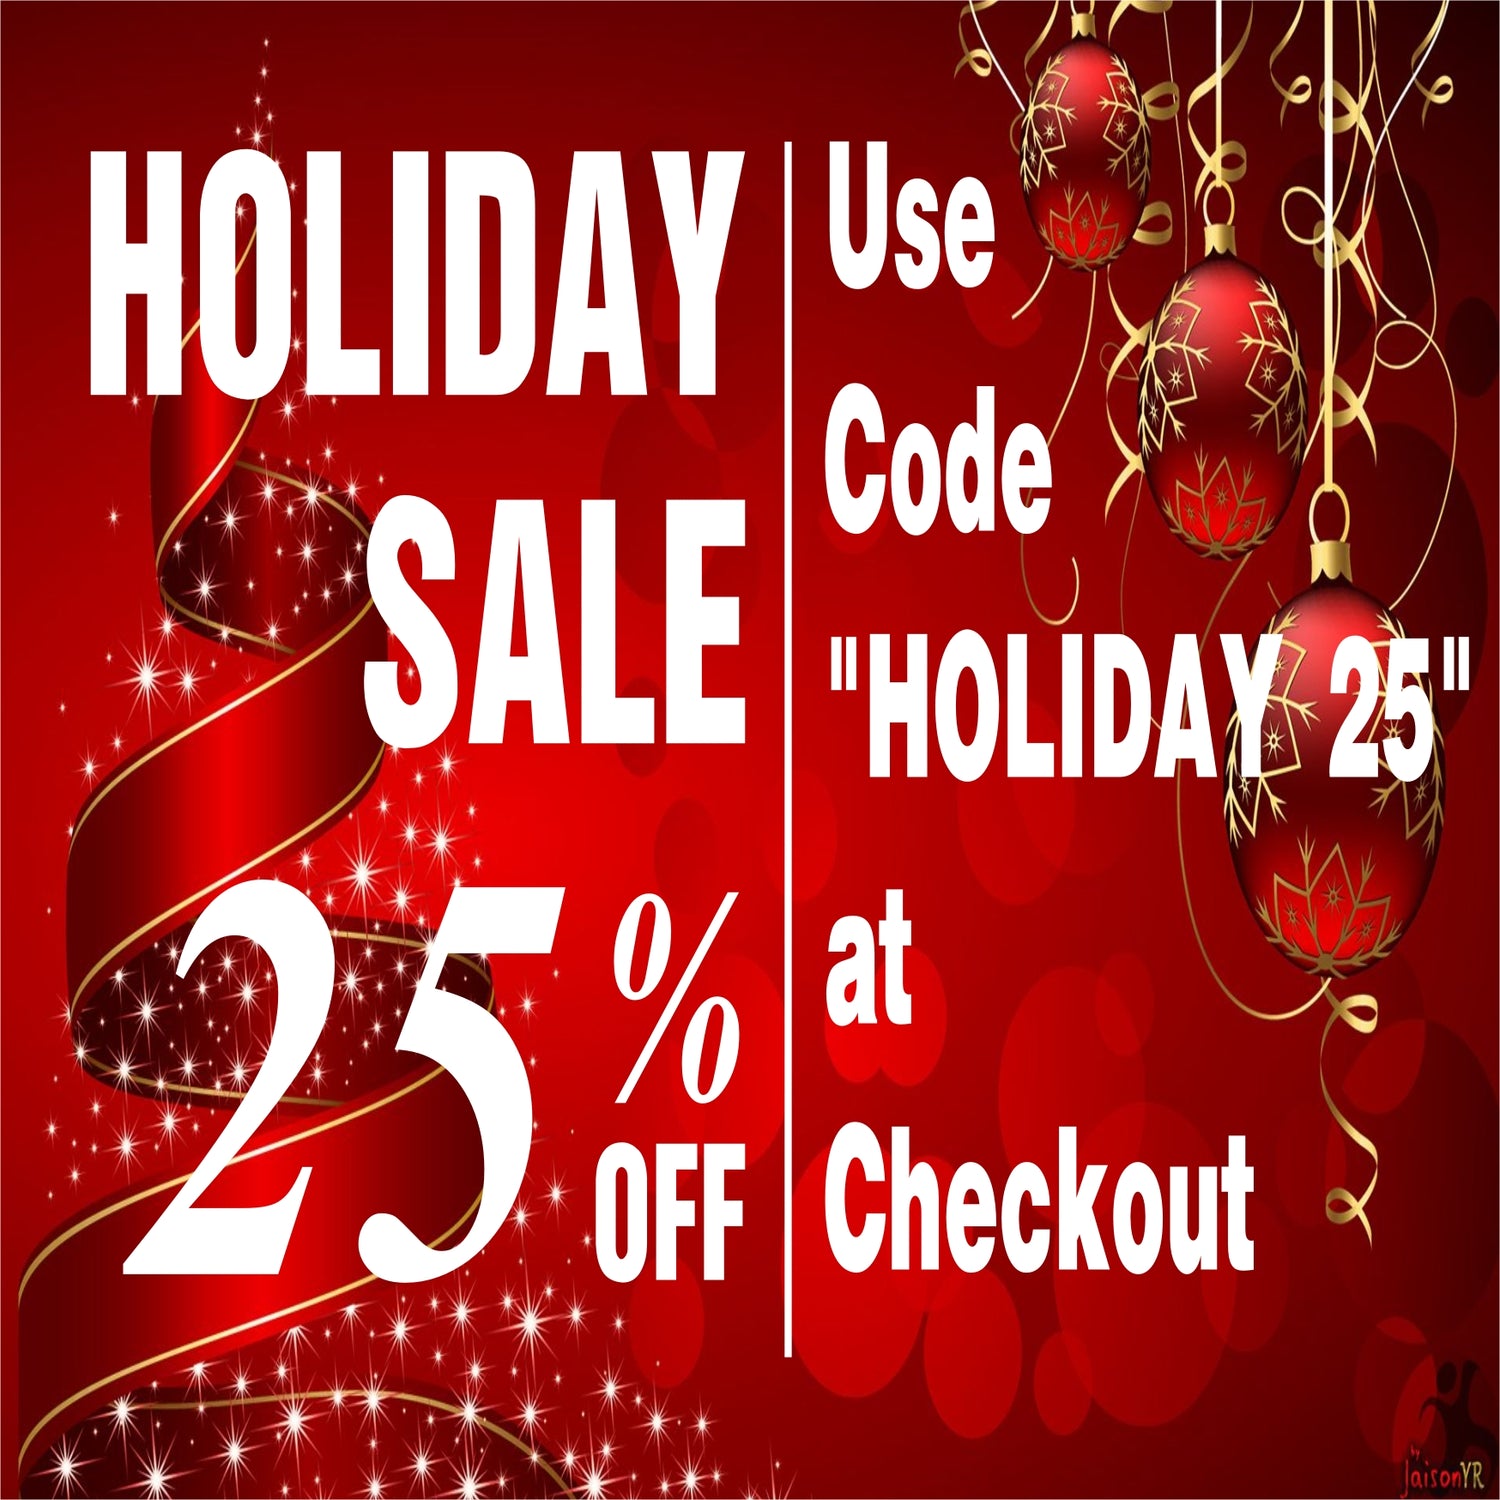 GET EXTRA DISCOUNT USE CODE "HOLIDAY 25"